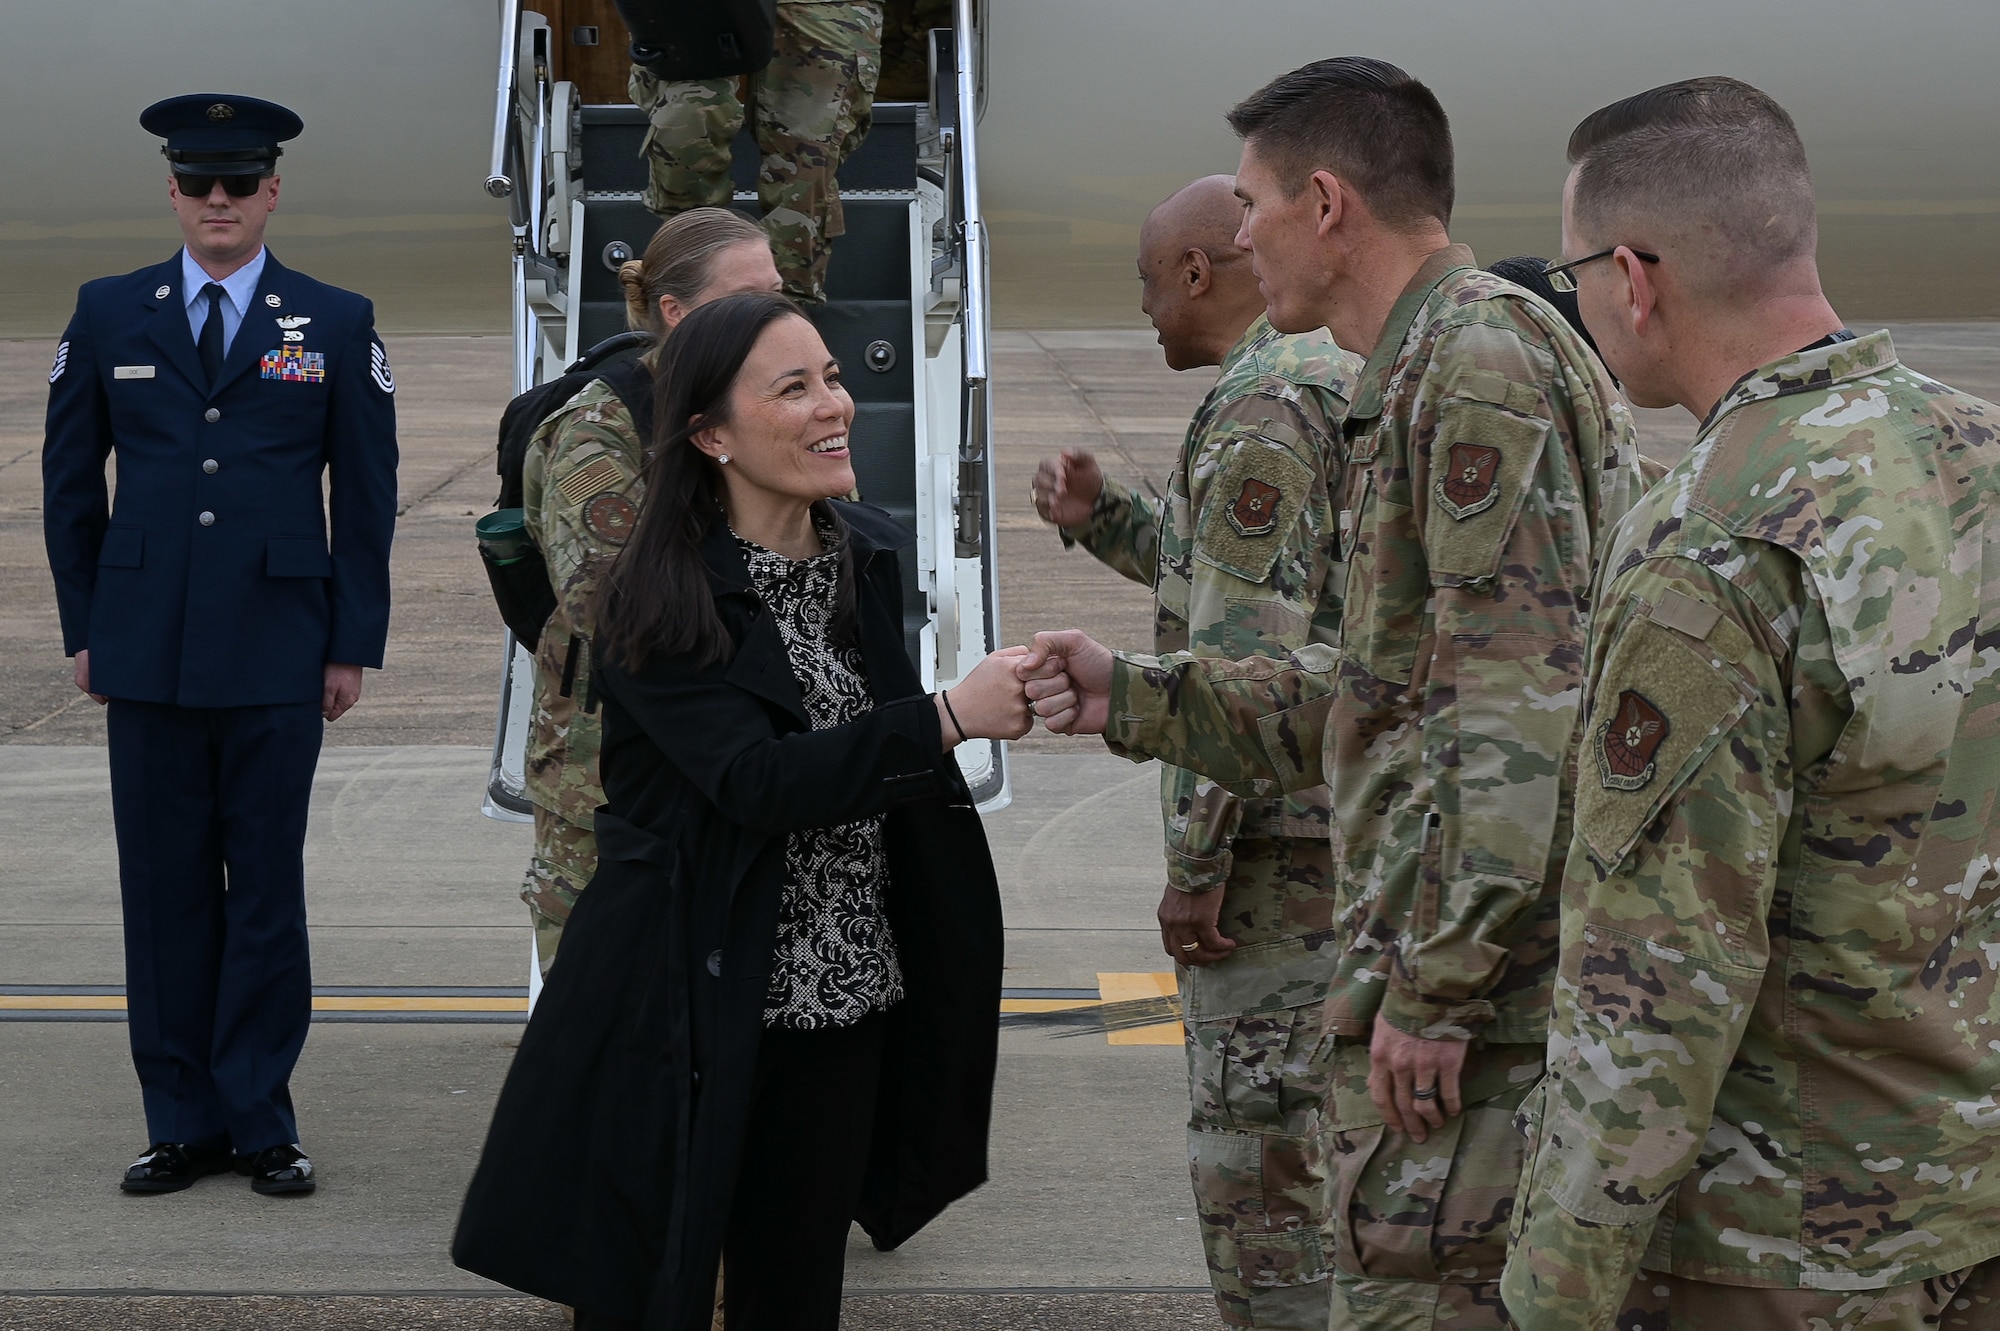 Leaders from Air Force Global Strike Command and 2nd Bomb Wing greet the Honorable Gina Ortiz Jones, Under Secretary of the Air Force, during her arrival to Barksdale Air Force Base, Louisiana, April 12, 2022. Jones visited Barksdale to attend the Women's Leadership Symposium and to see Barksdale’s Striker Nation culture and mission firsthand. (U.S. Air Force photo by Senior Airman Jonathan E. Ramos)